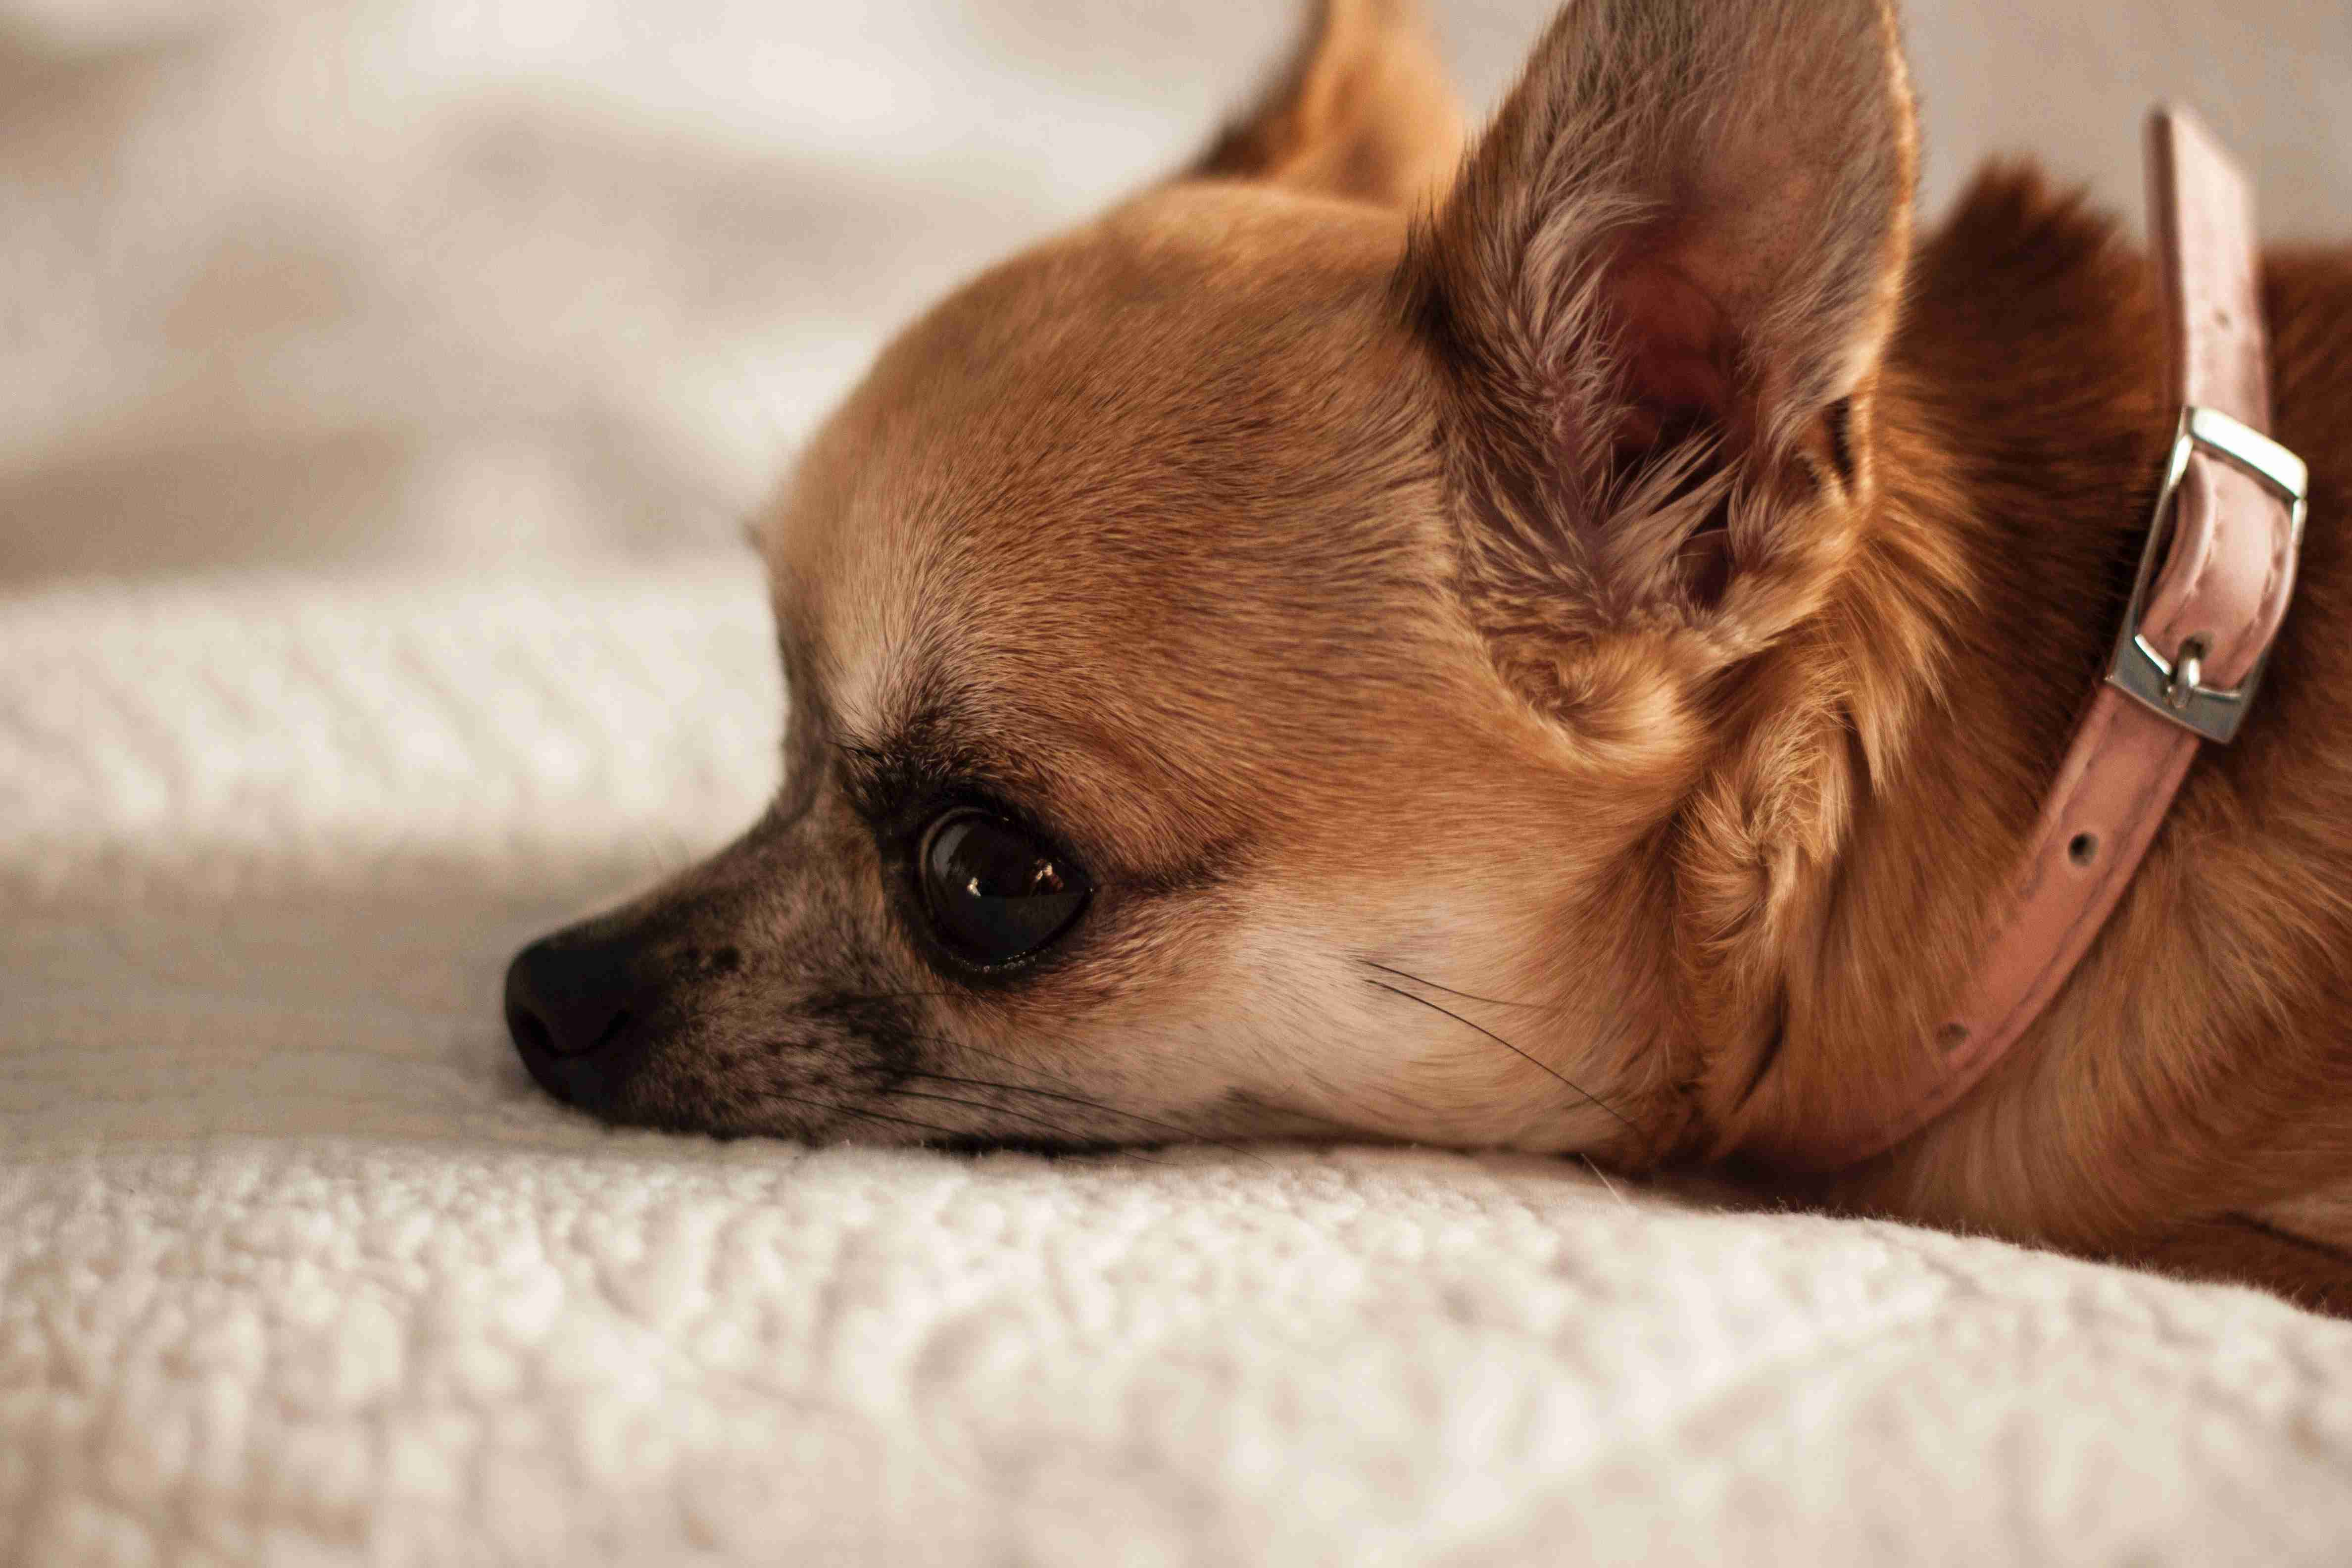 Can Chihuahuas become aggressive due to lack of exercise or mental stimulation?